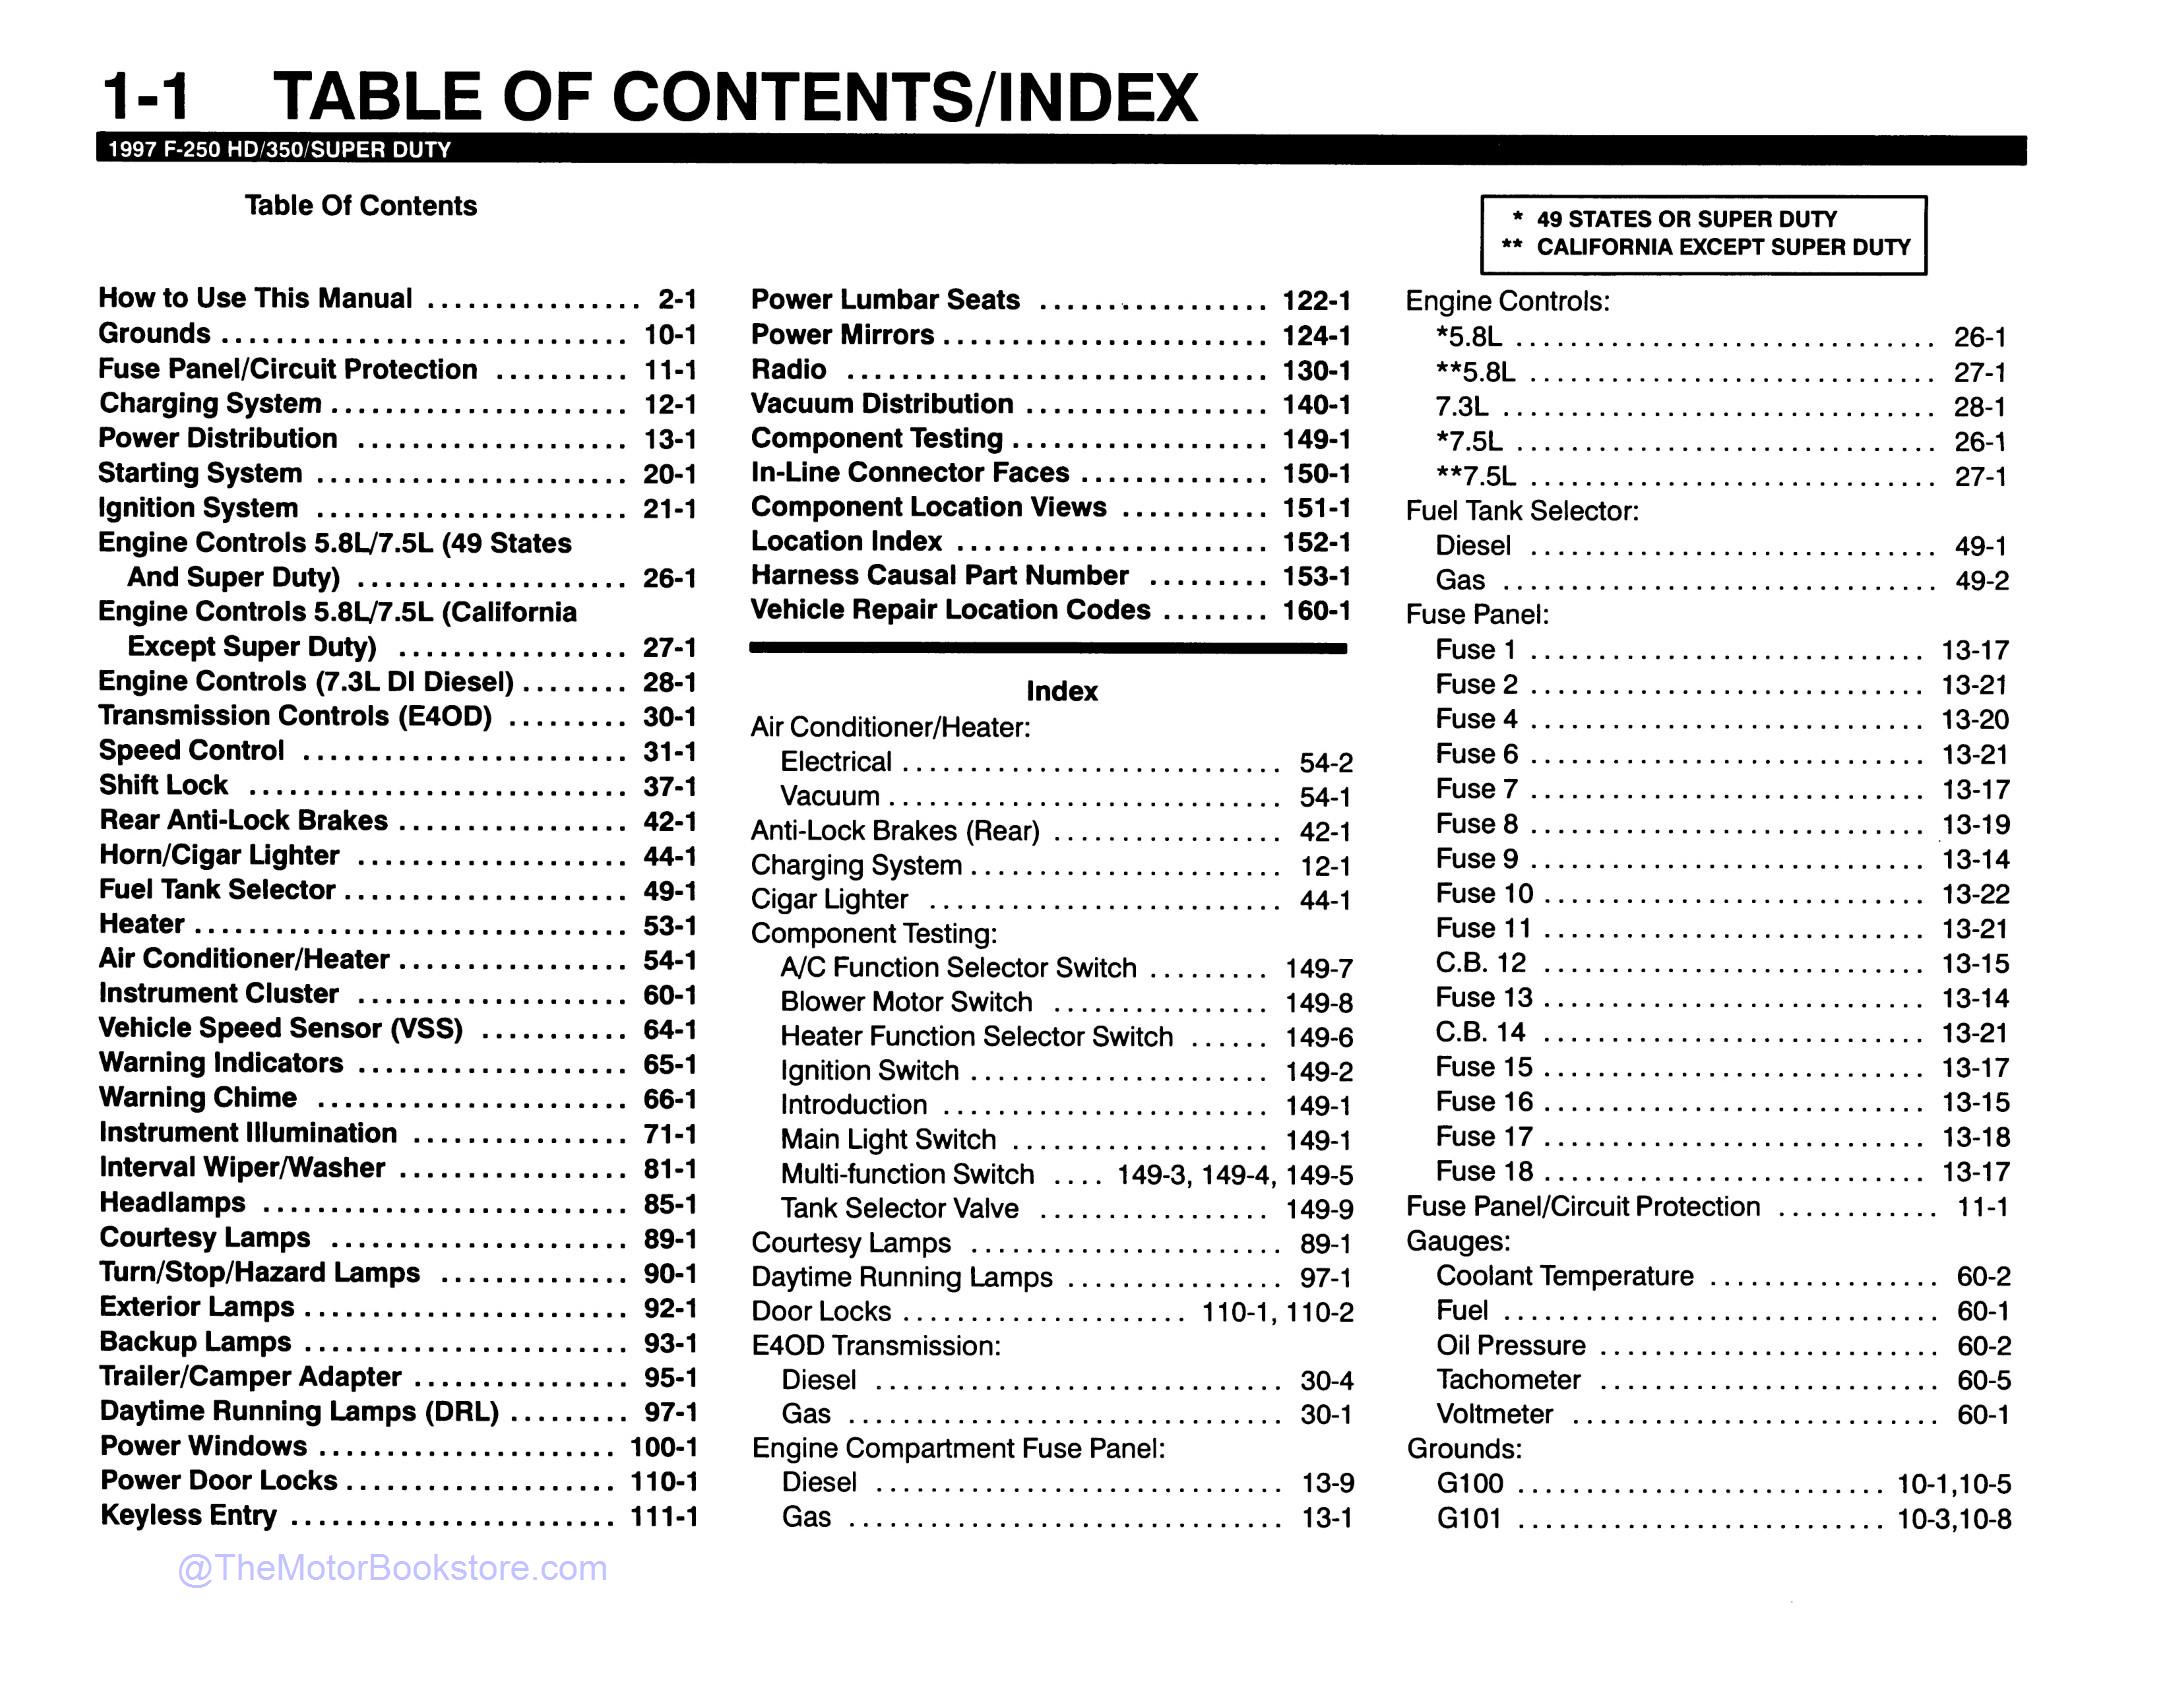 1997 Ford F-250 HD, F-350, F-Super Duty Electrical Manual  - Table of Contents 1